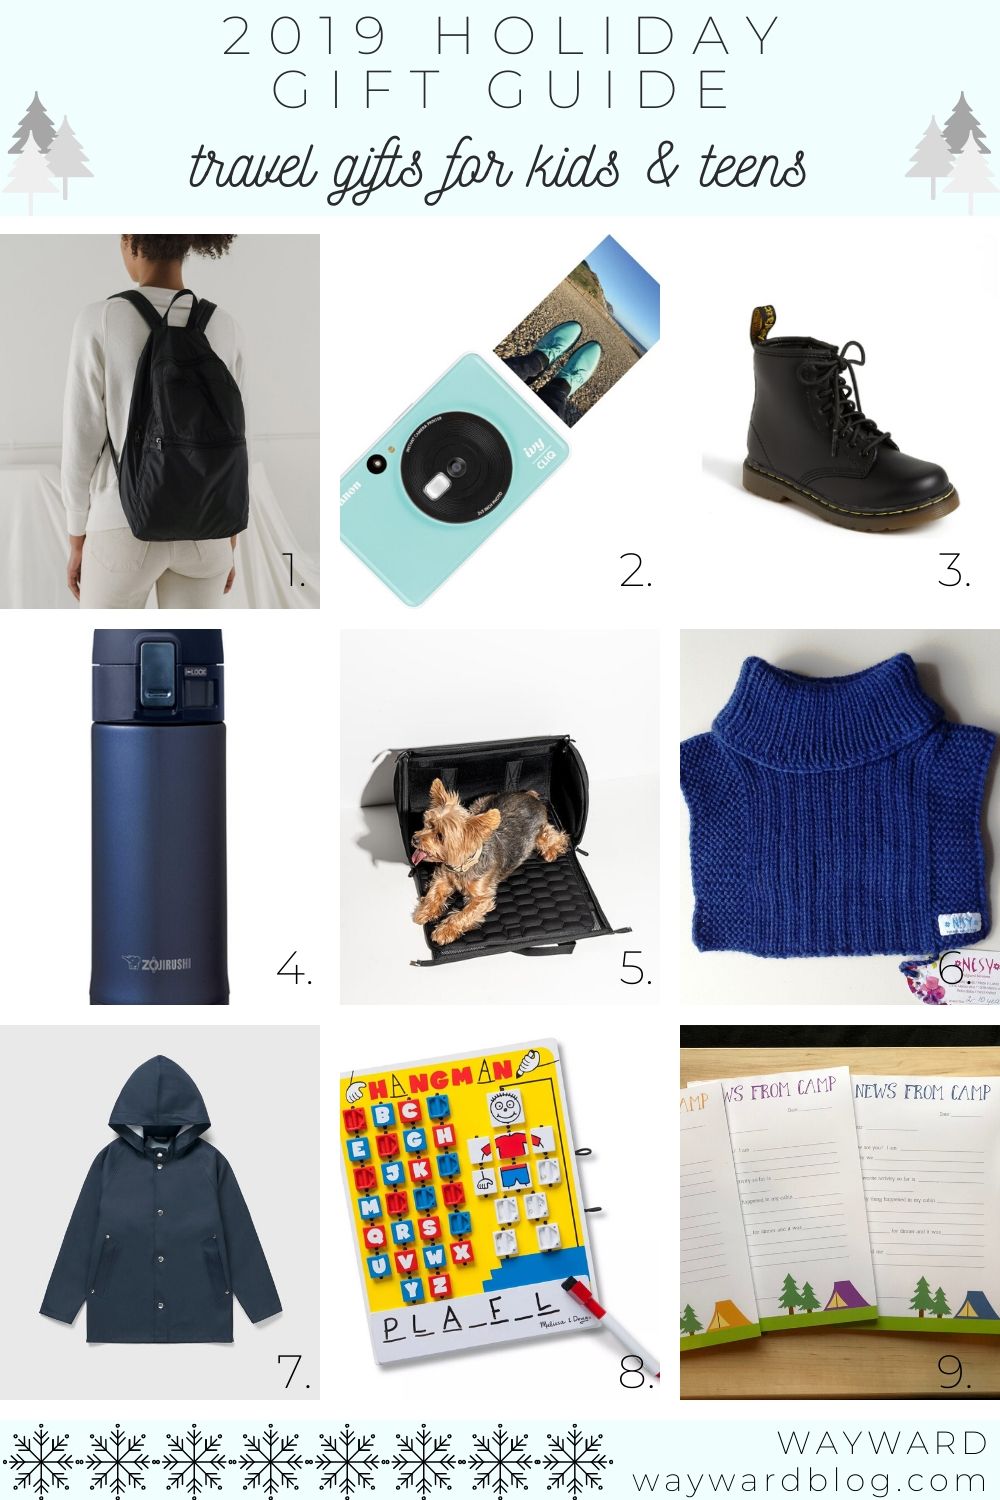 A collage of all gift's in the author's Kids and Teens Travel Gifts guide